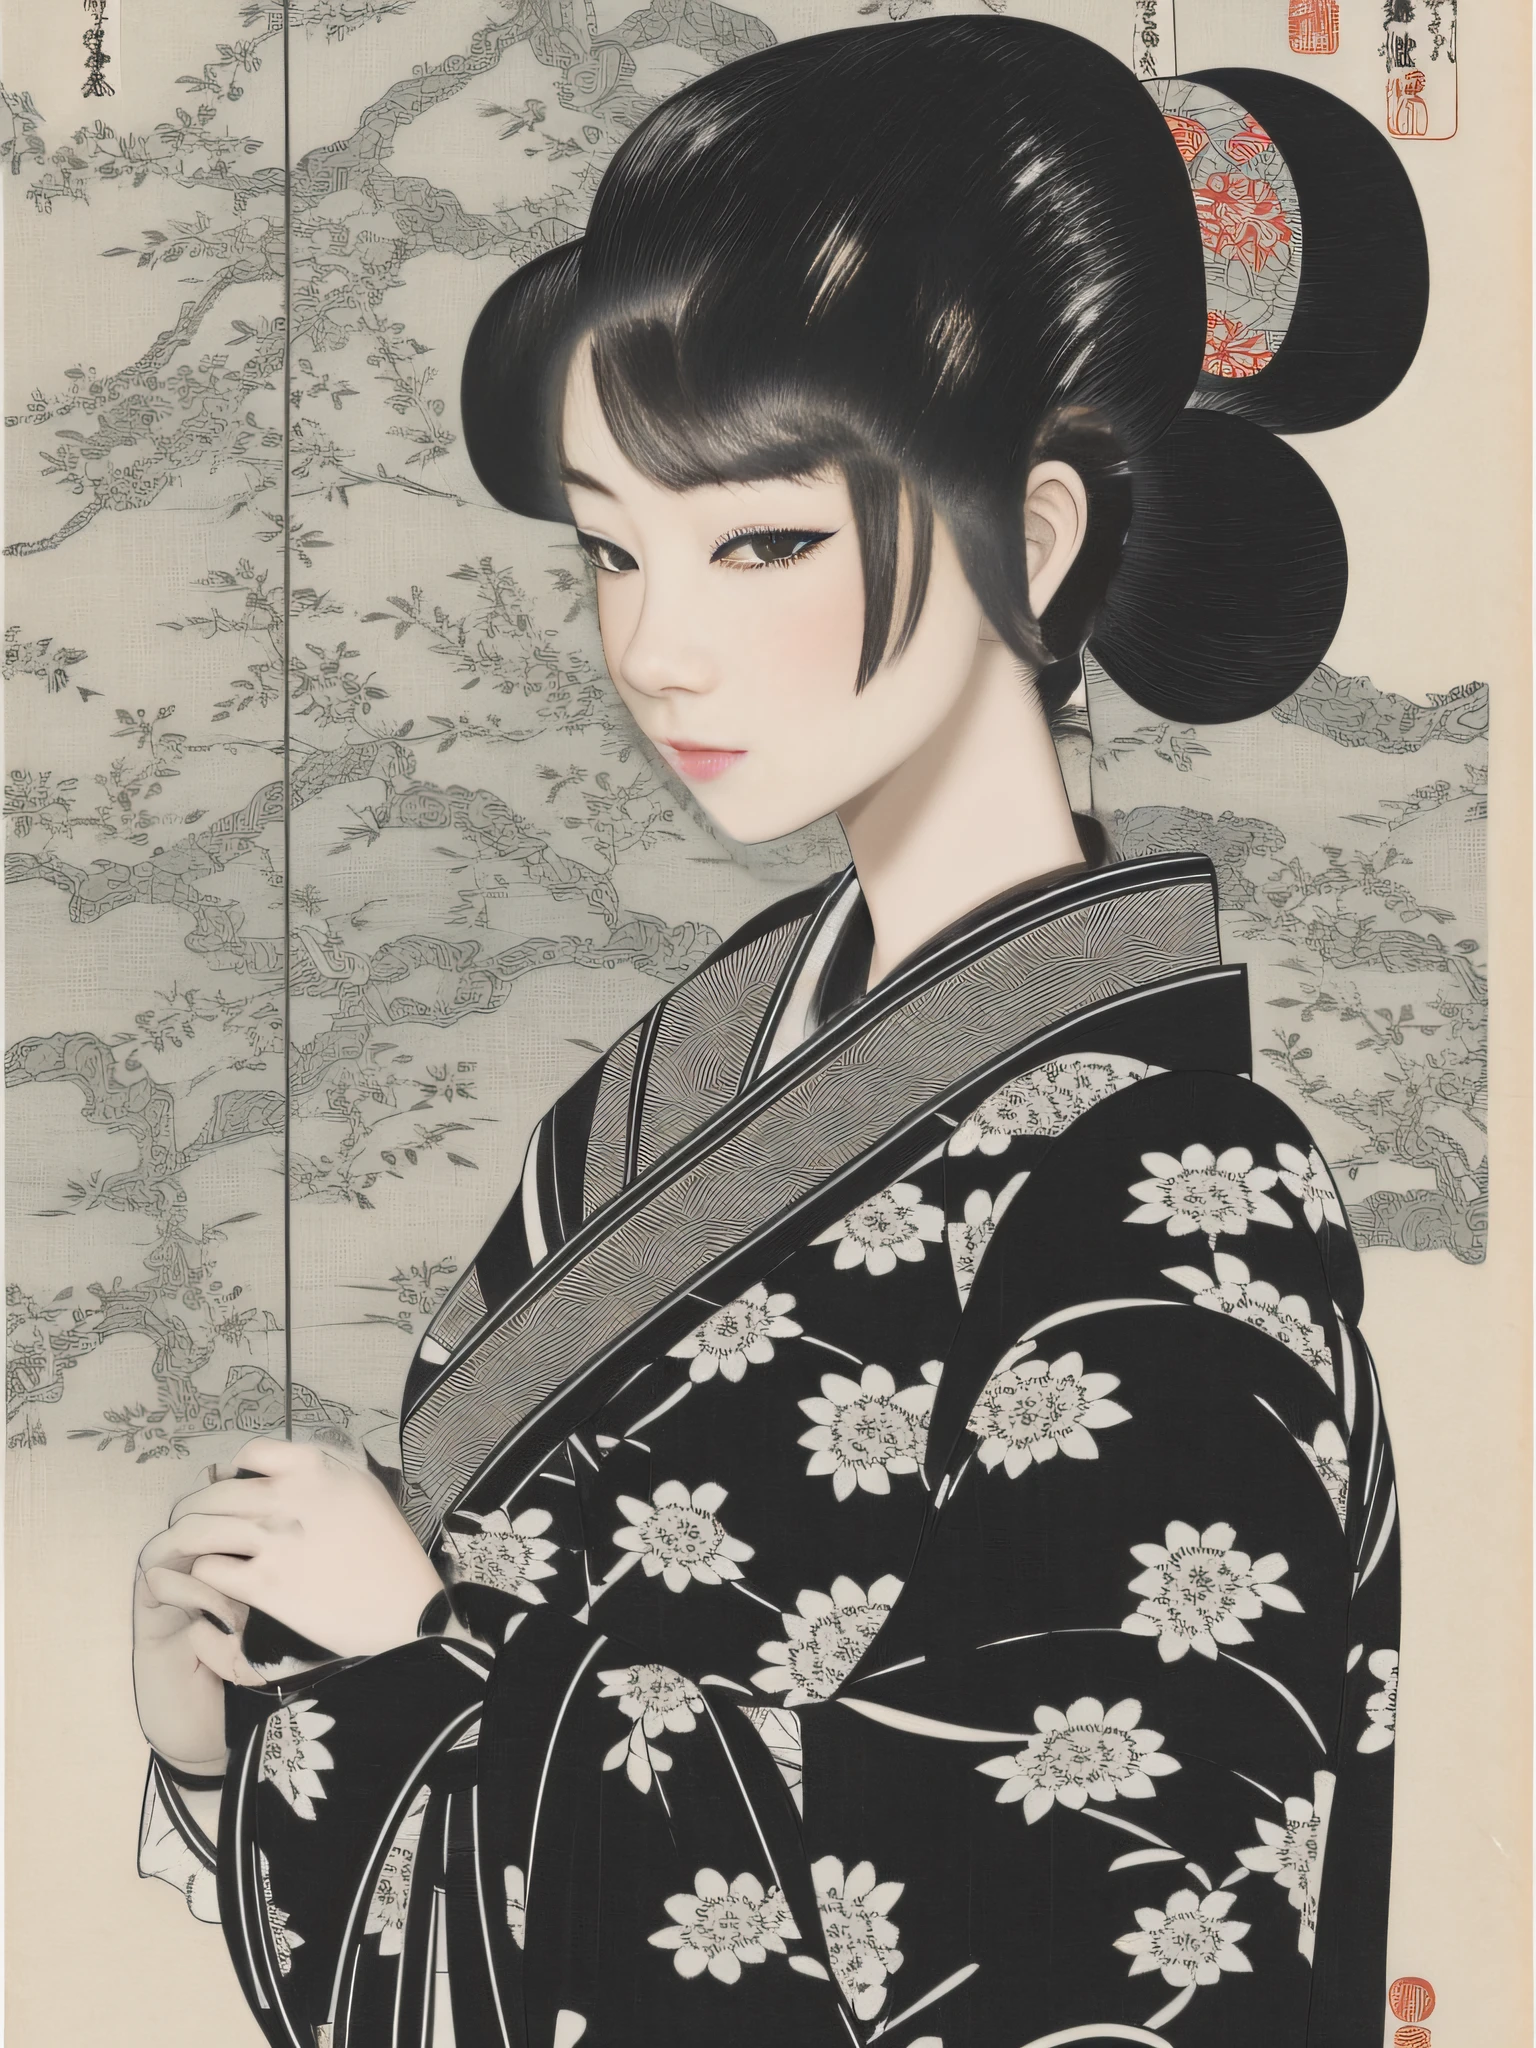 Black and white woodblock prints of the Edo period. The eyes are too big and too realistic. Please also include the atmosphere of ukiyo-e.